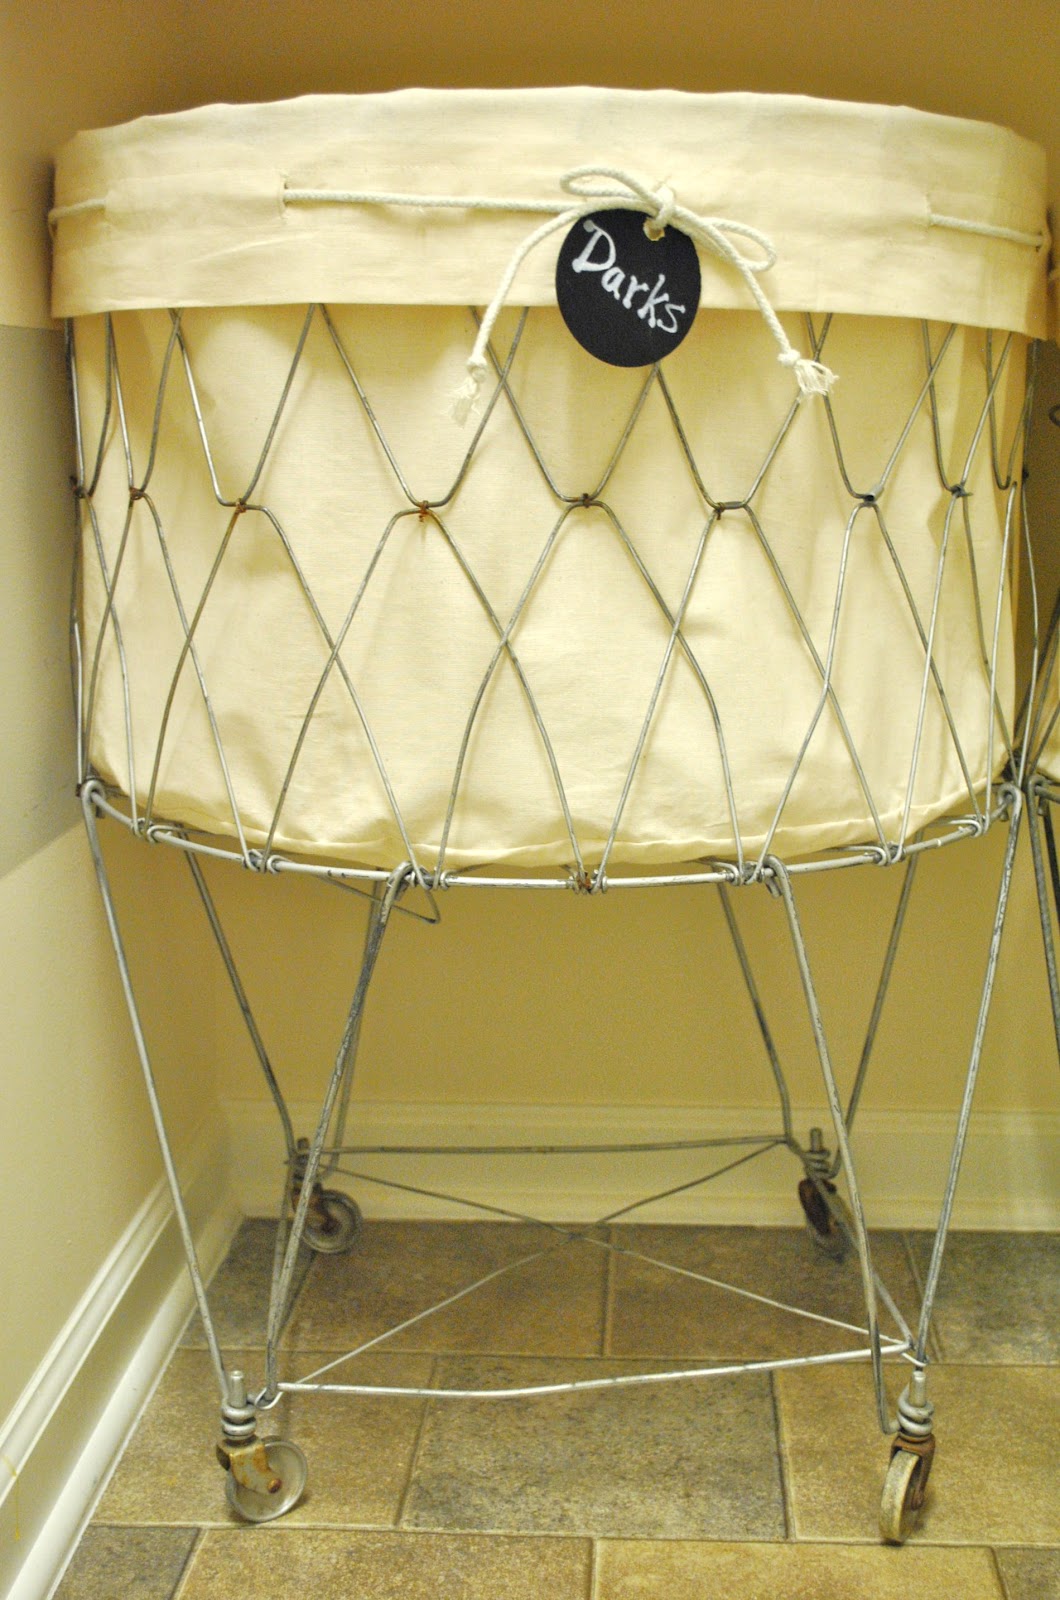 How to Make a Laundry Cart Liner